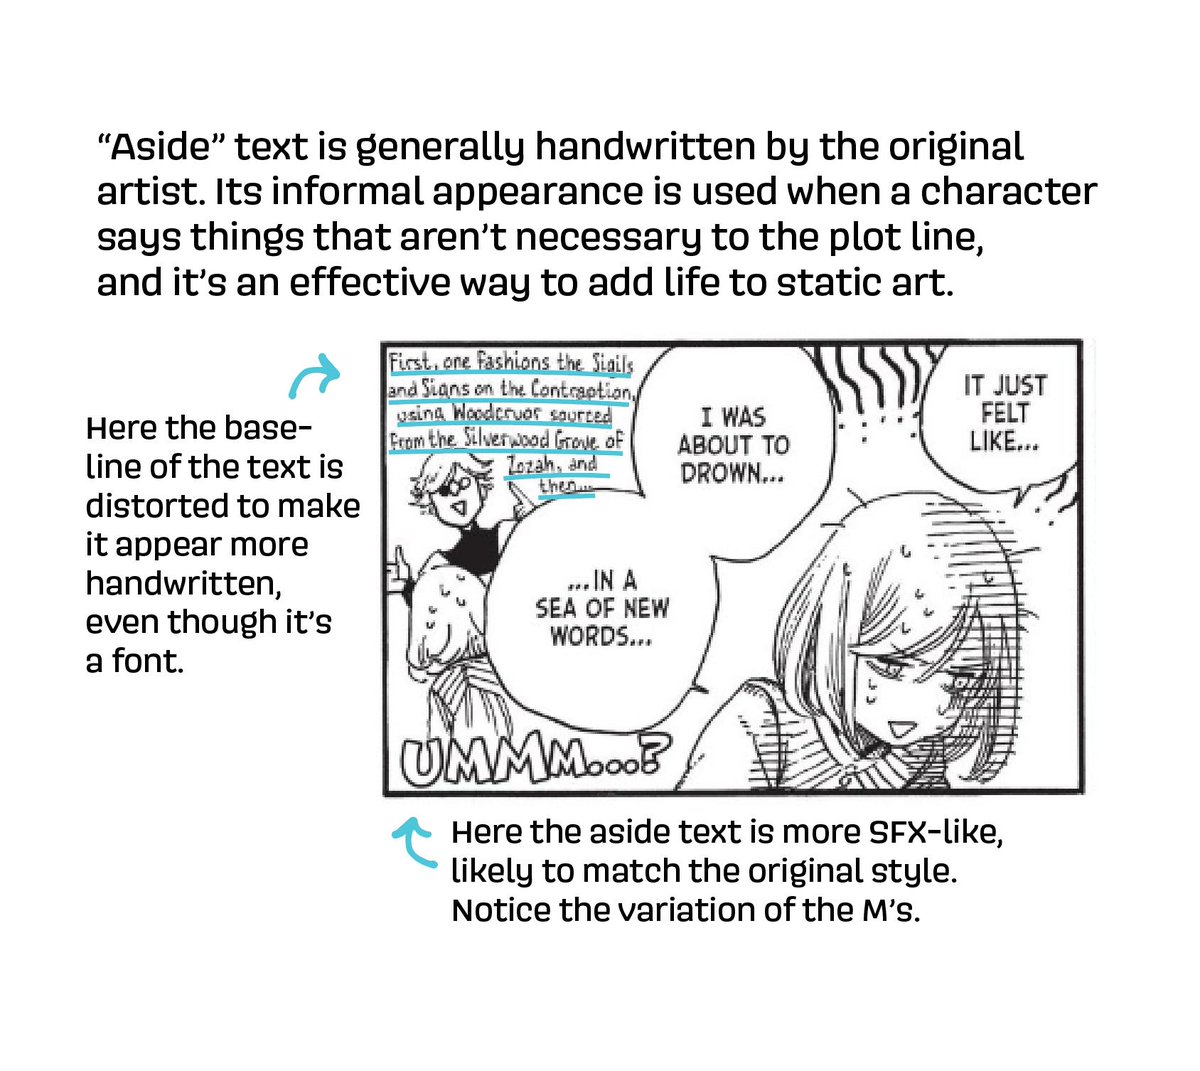 The aside text in Witch Hat Atelier is especially well done. Instead of leaving the text to be uniform and lifeless, the letterer matches the tone of the art with several techniques, like distortion and whitespace.